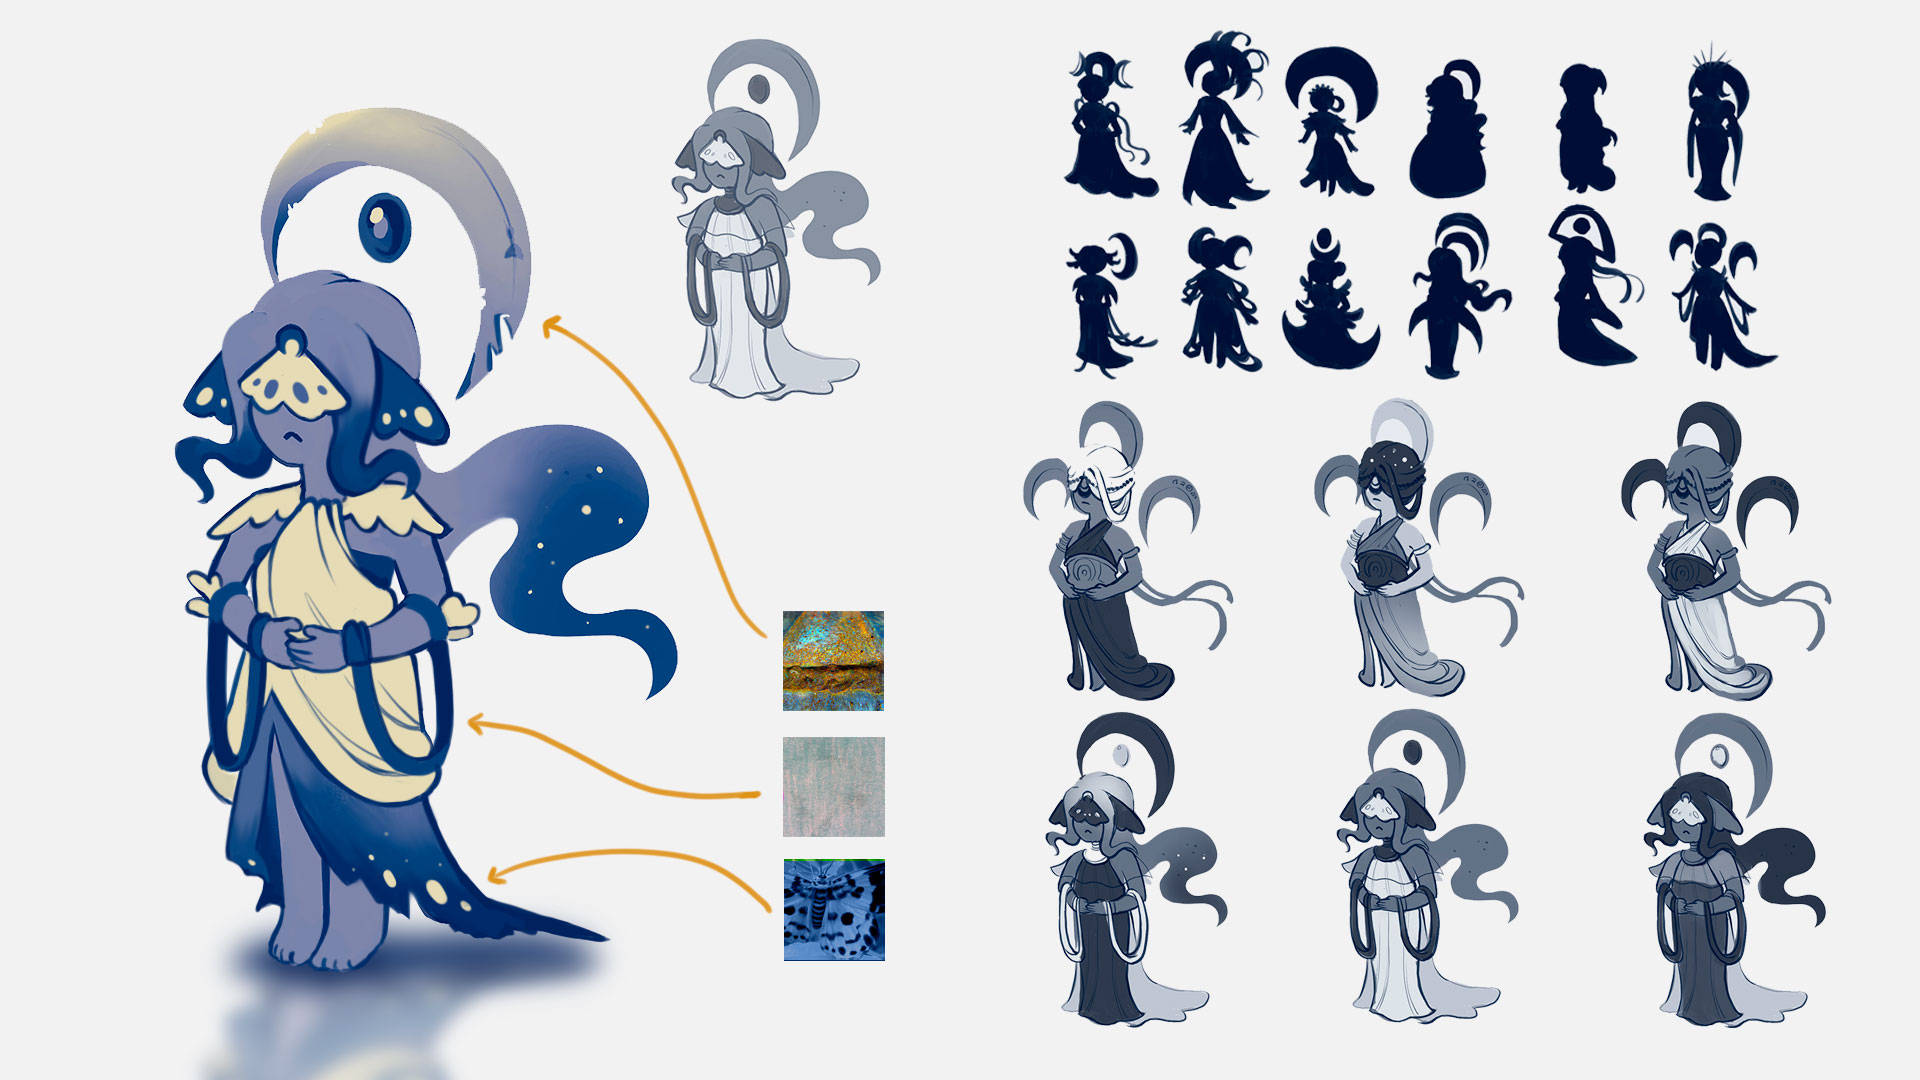 A rendered drawing of the fallen goddess is on the left with images of material references to the right. Her design is based off Aztec mythology and the blue tiger moth. To the right there are silhouettes and concept sketches of the character.